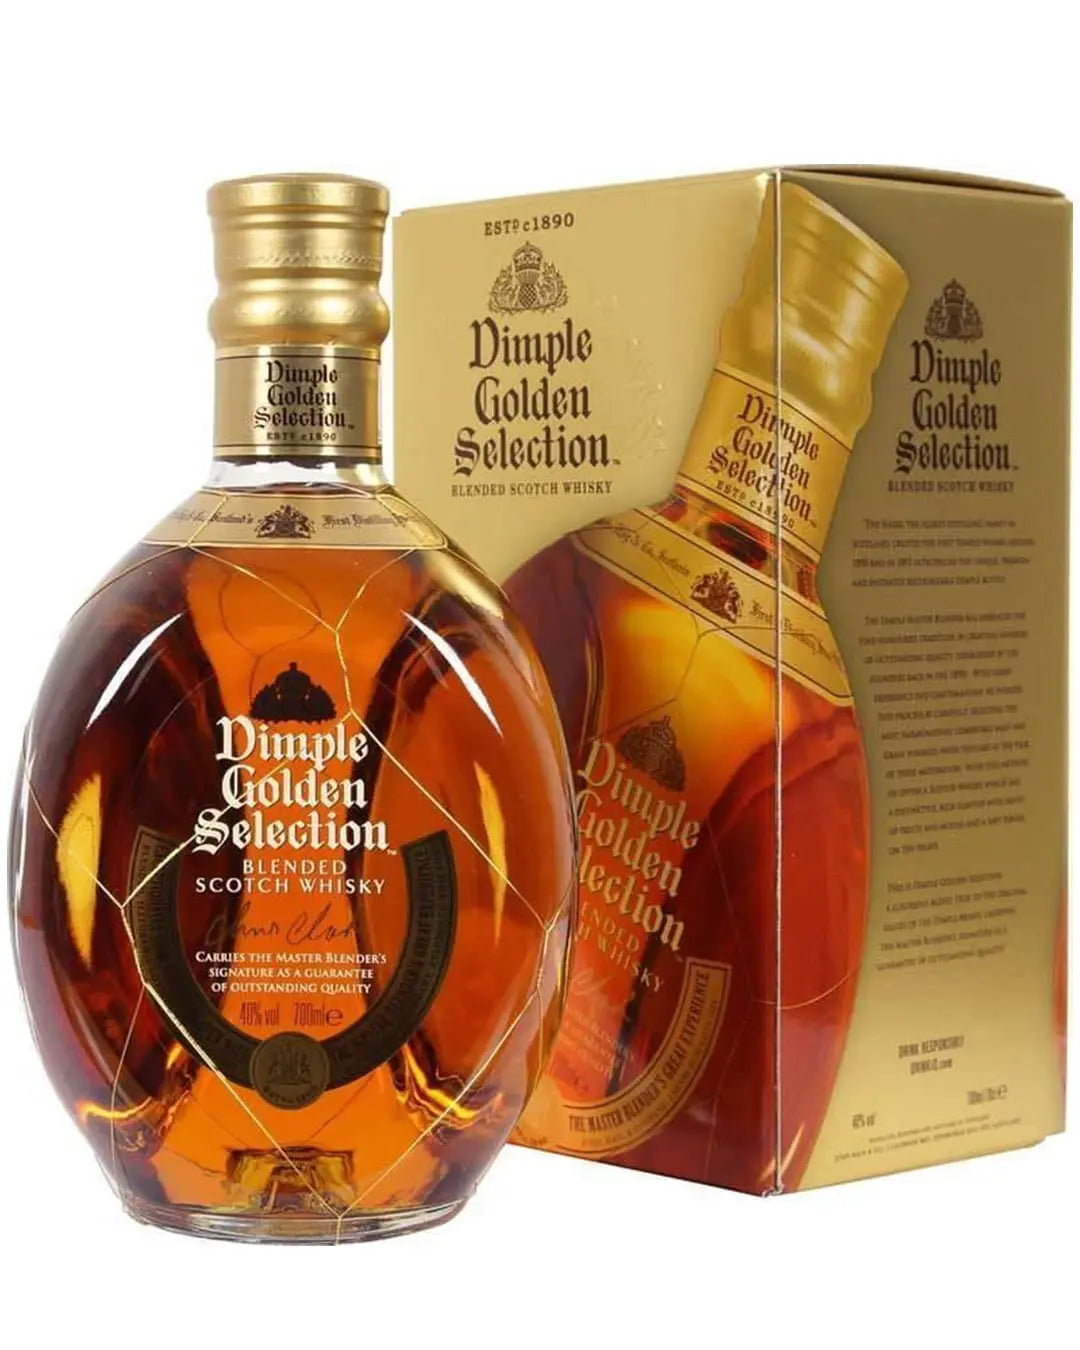 Dimple Golden Selection Whisky, 70 cl Whisky 5000281037479